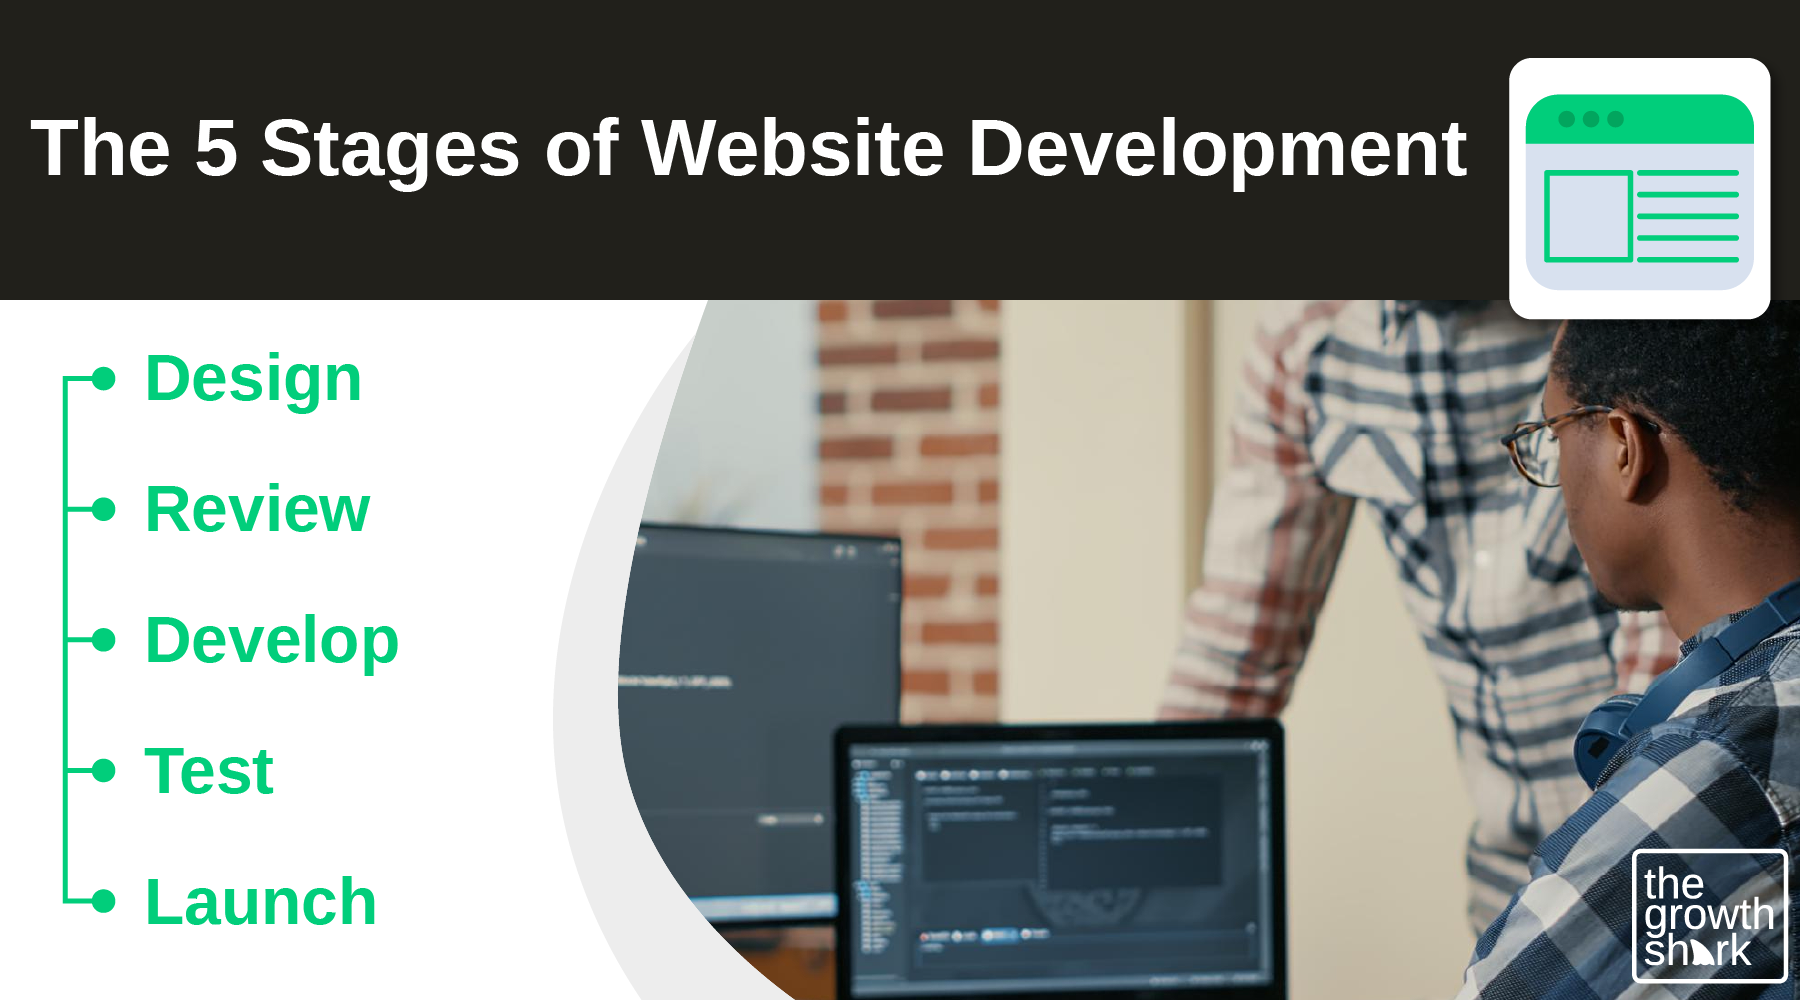 Learn to master the 5 stages of the website development process